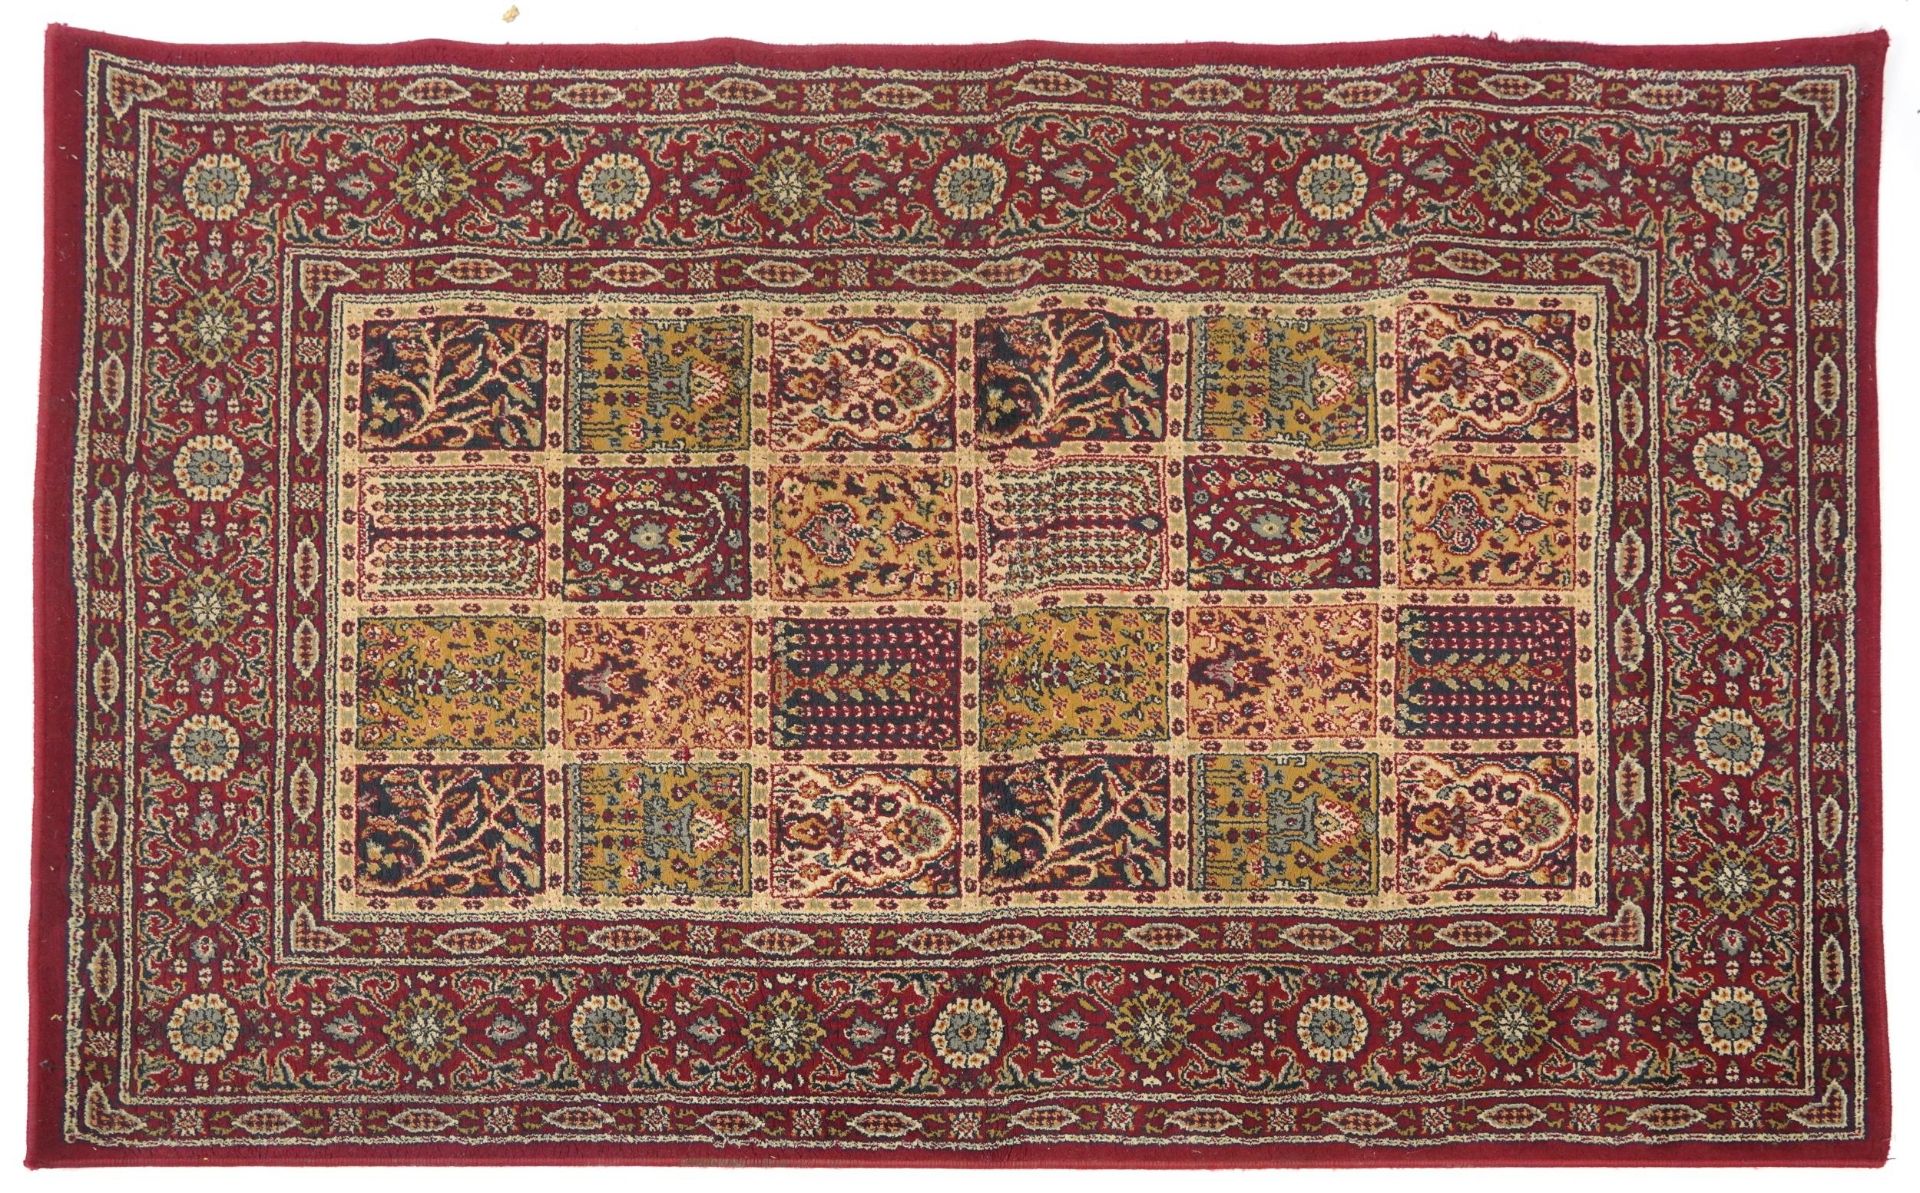 Rectangular Persian rug, the central field having a repeat tree design, the red ground borders